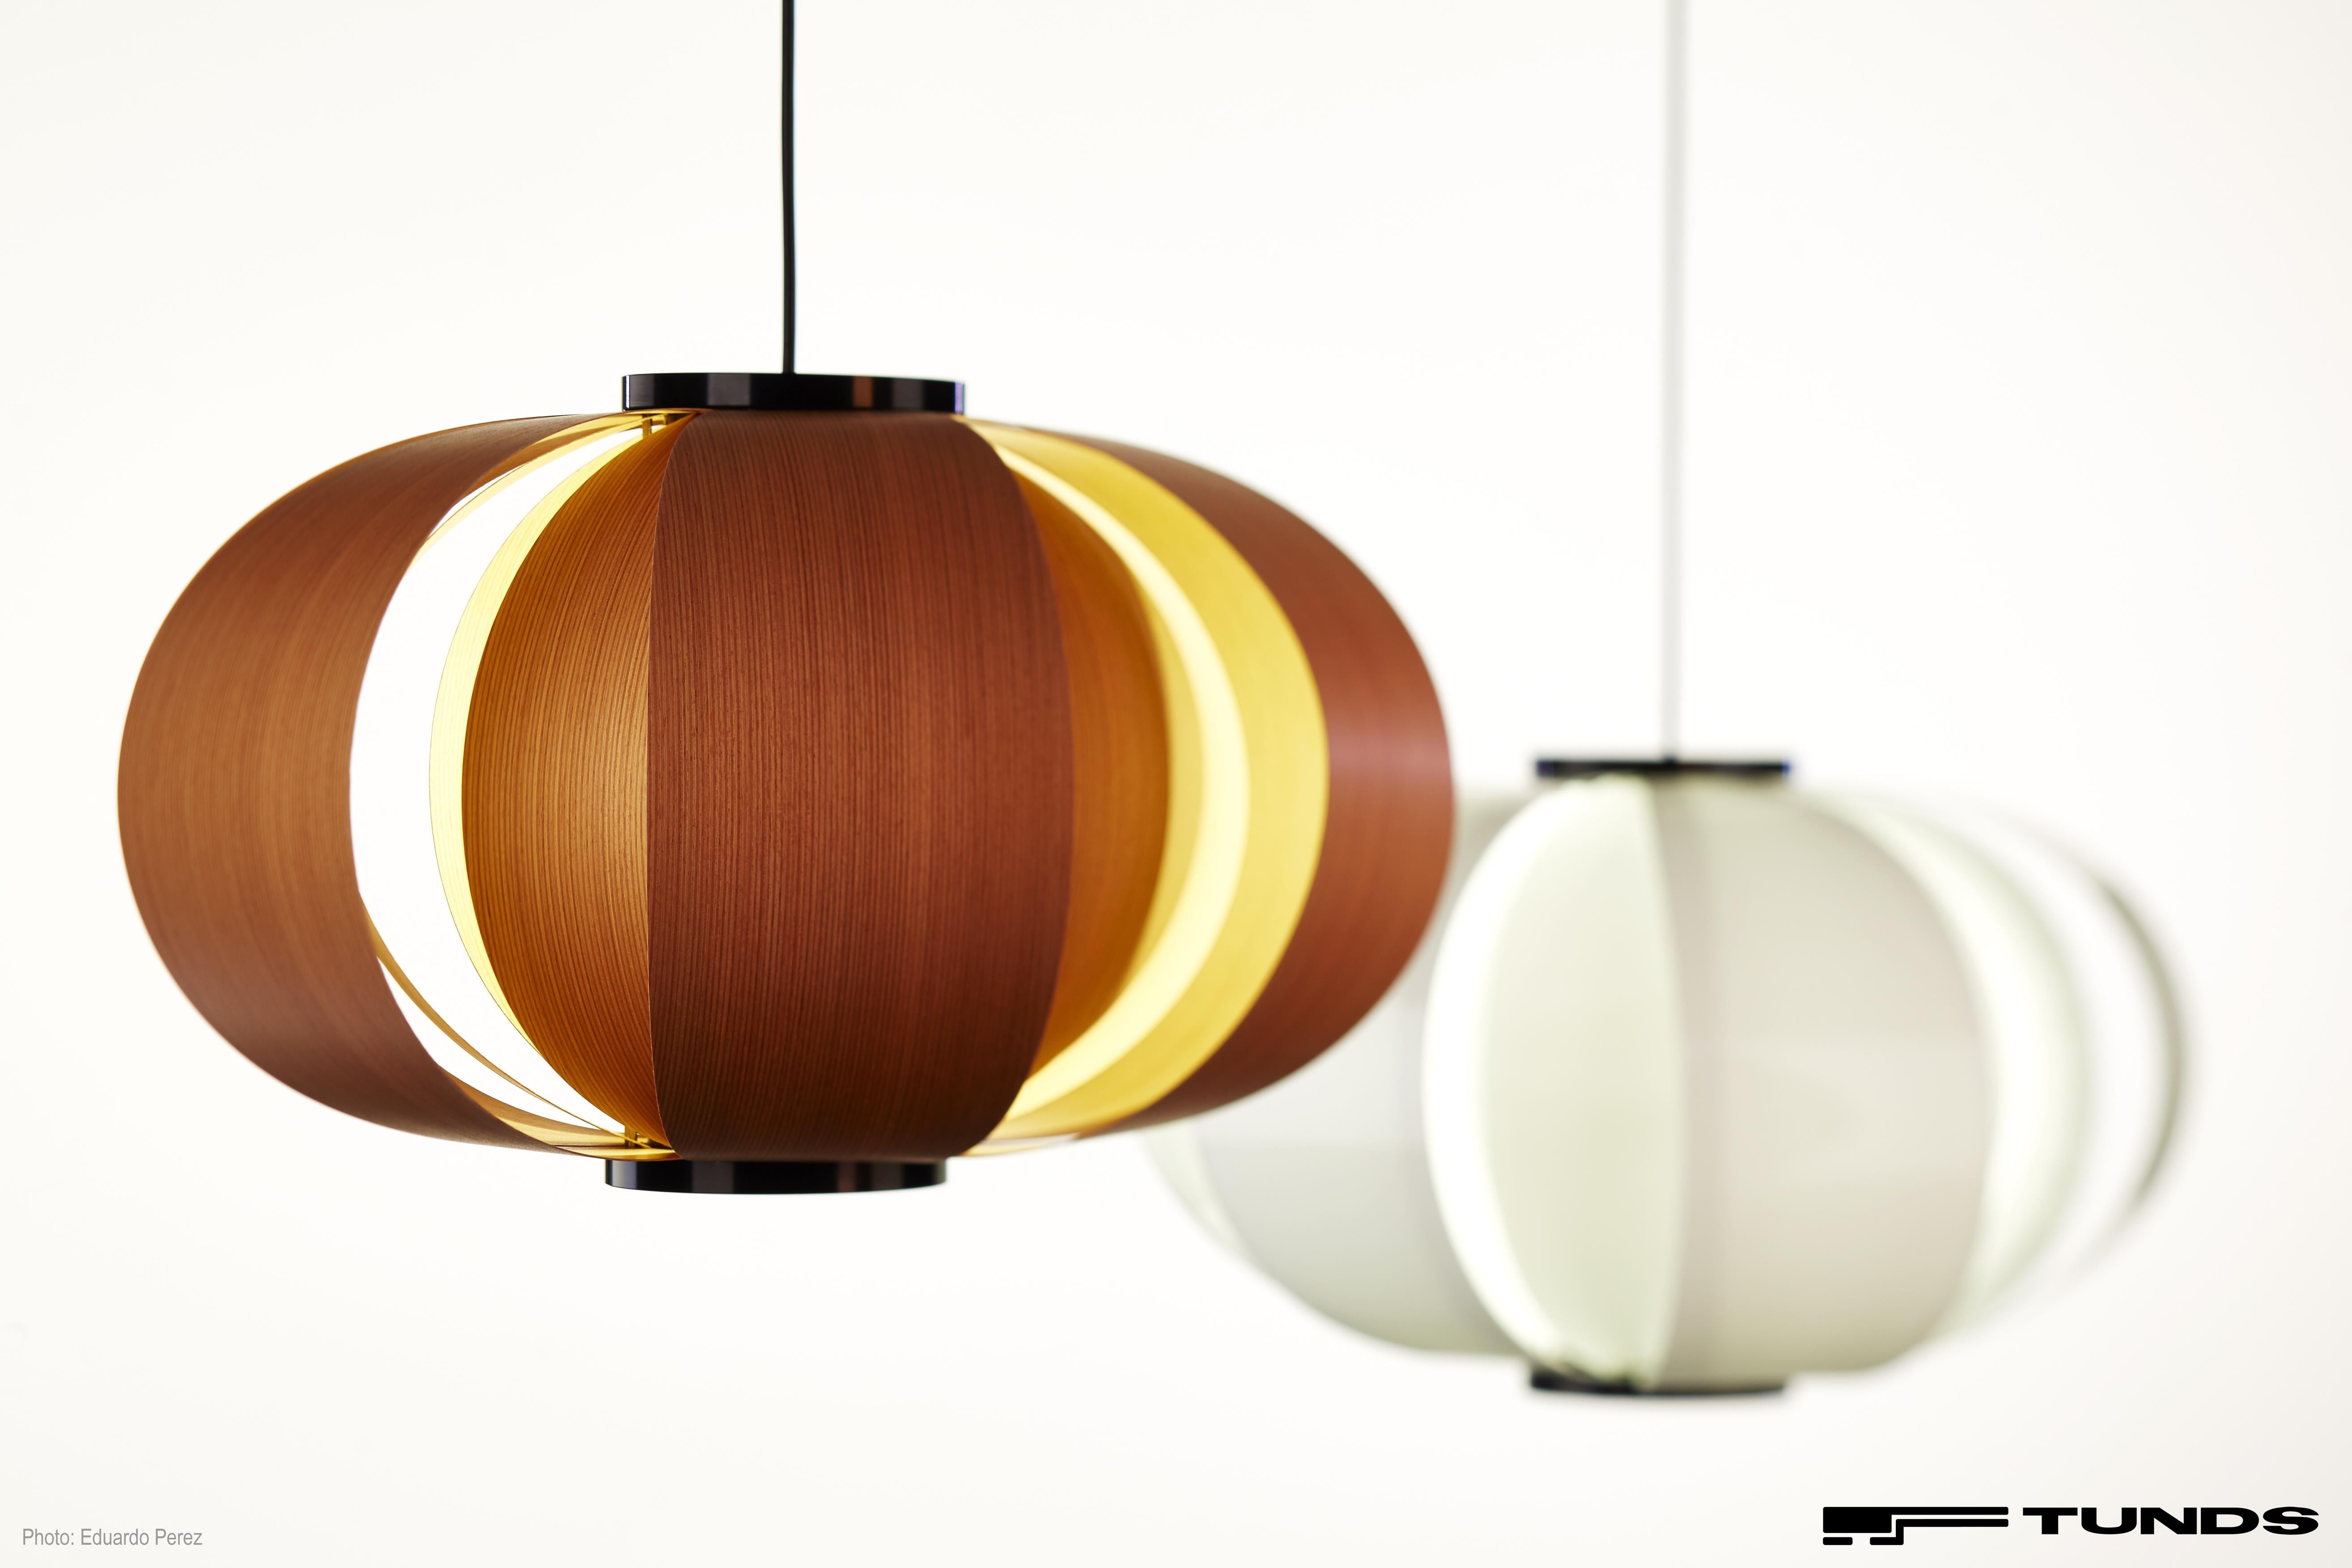 Large 'Disa' wood suspension lamp by J.A. Coderch for Tunds. 

Called by Pablo Picasso 